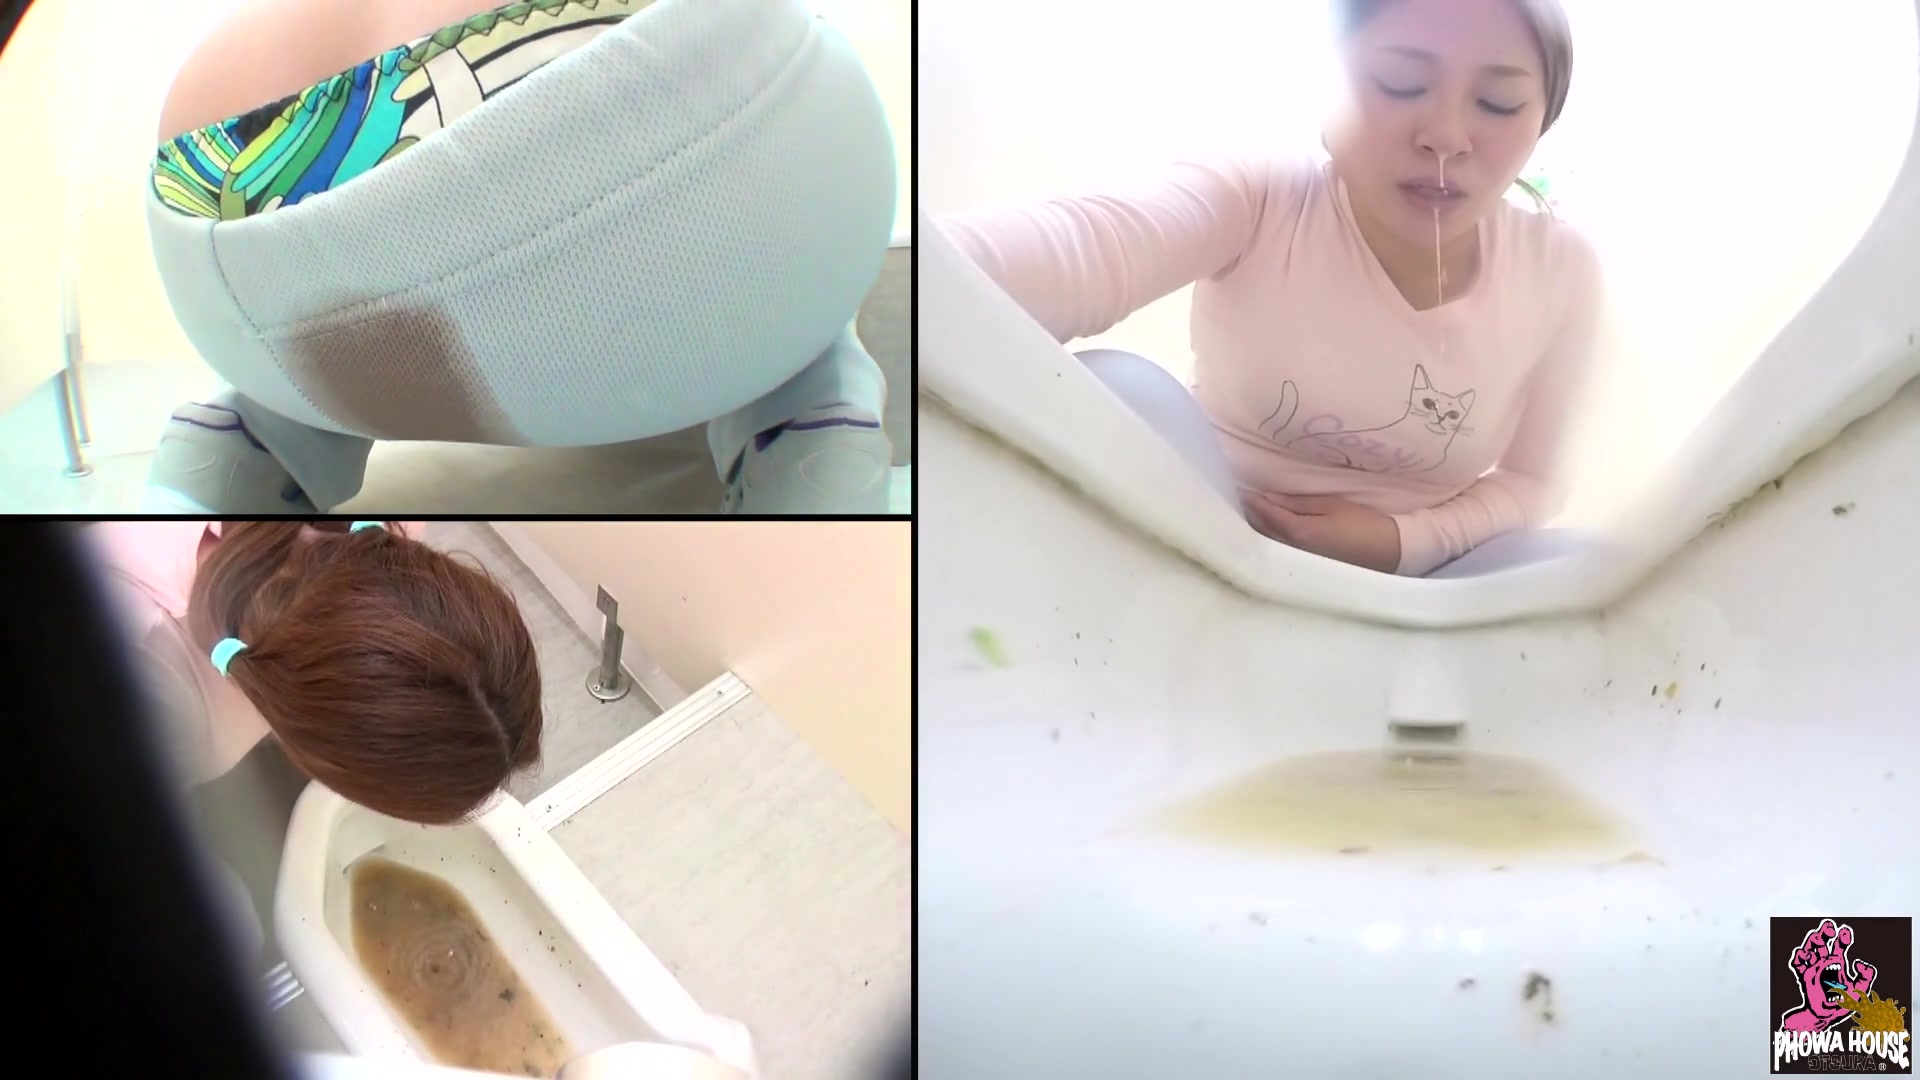 Diarrhea and vomiting - part 2 - ScatFap.com - scat porn search - FREE  videos of extreme kaviar and copro sex, dirty shit eating and smearing